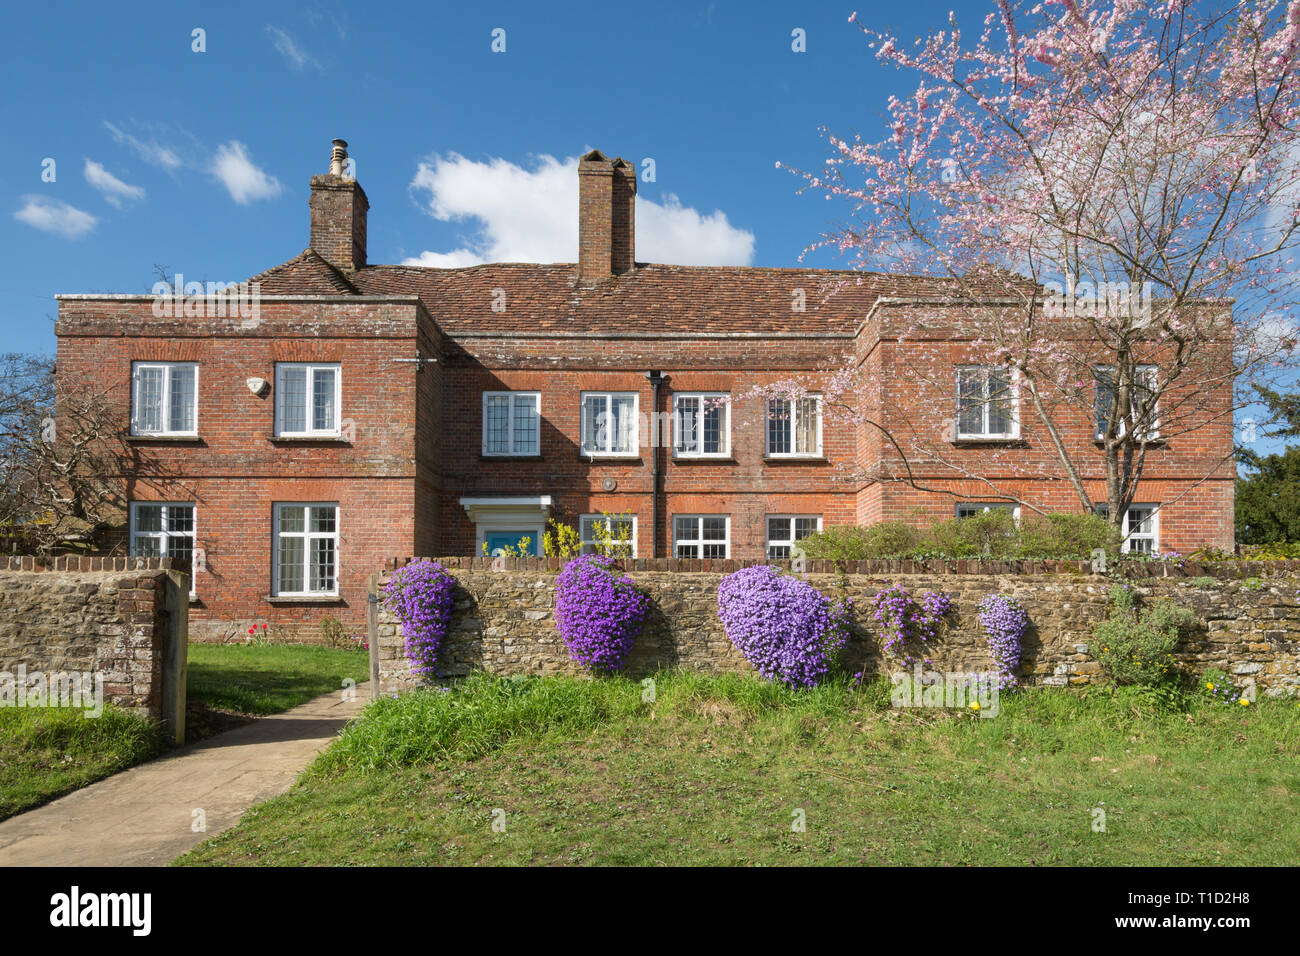 The historic Hill Farm house building in the village of Thursley, Surrey, UK, on a sunny spring day with pink blossom tree and purple aubretia flowers Stock Photo